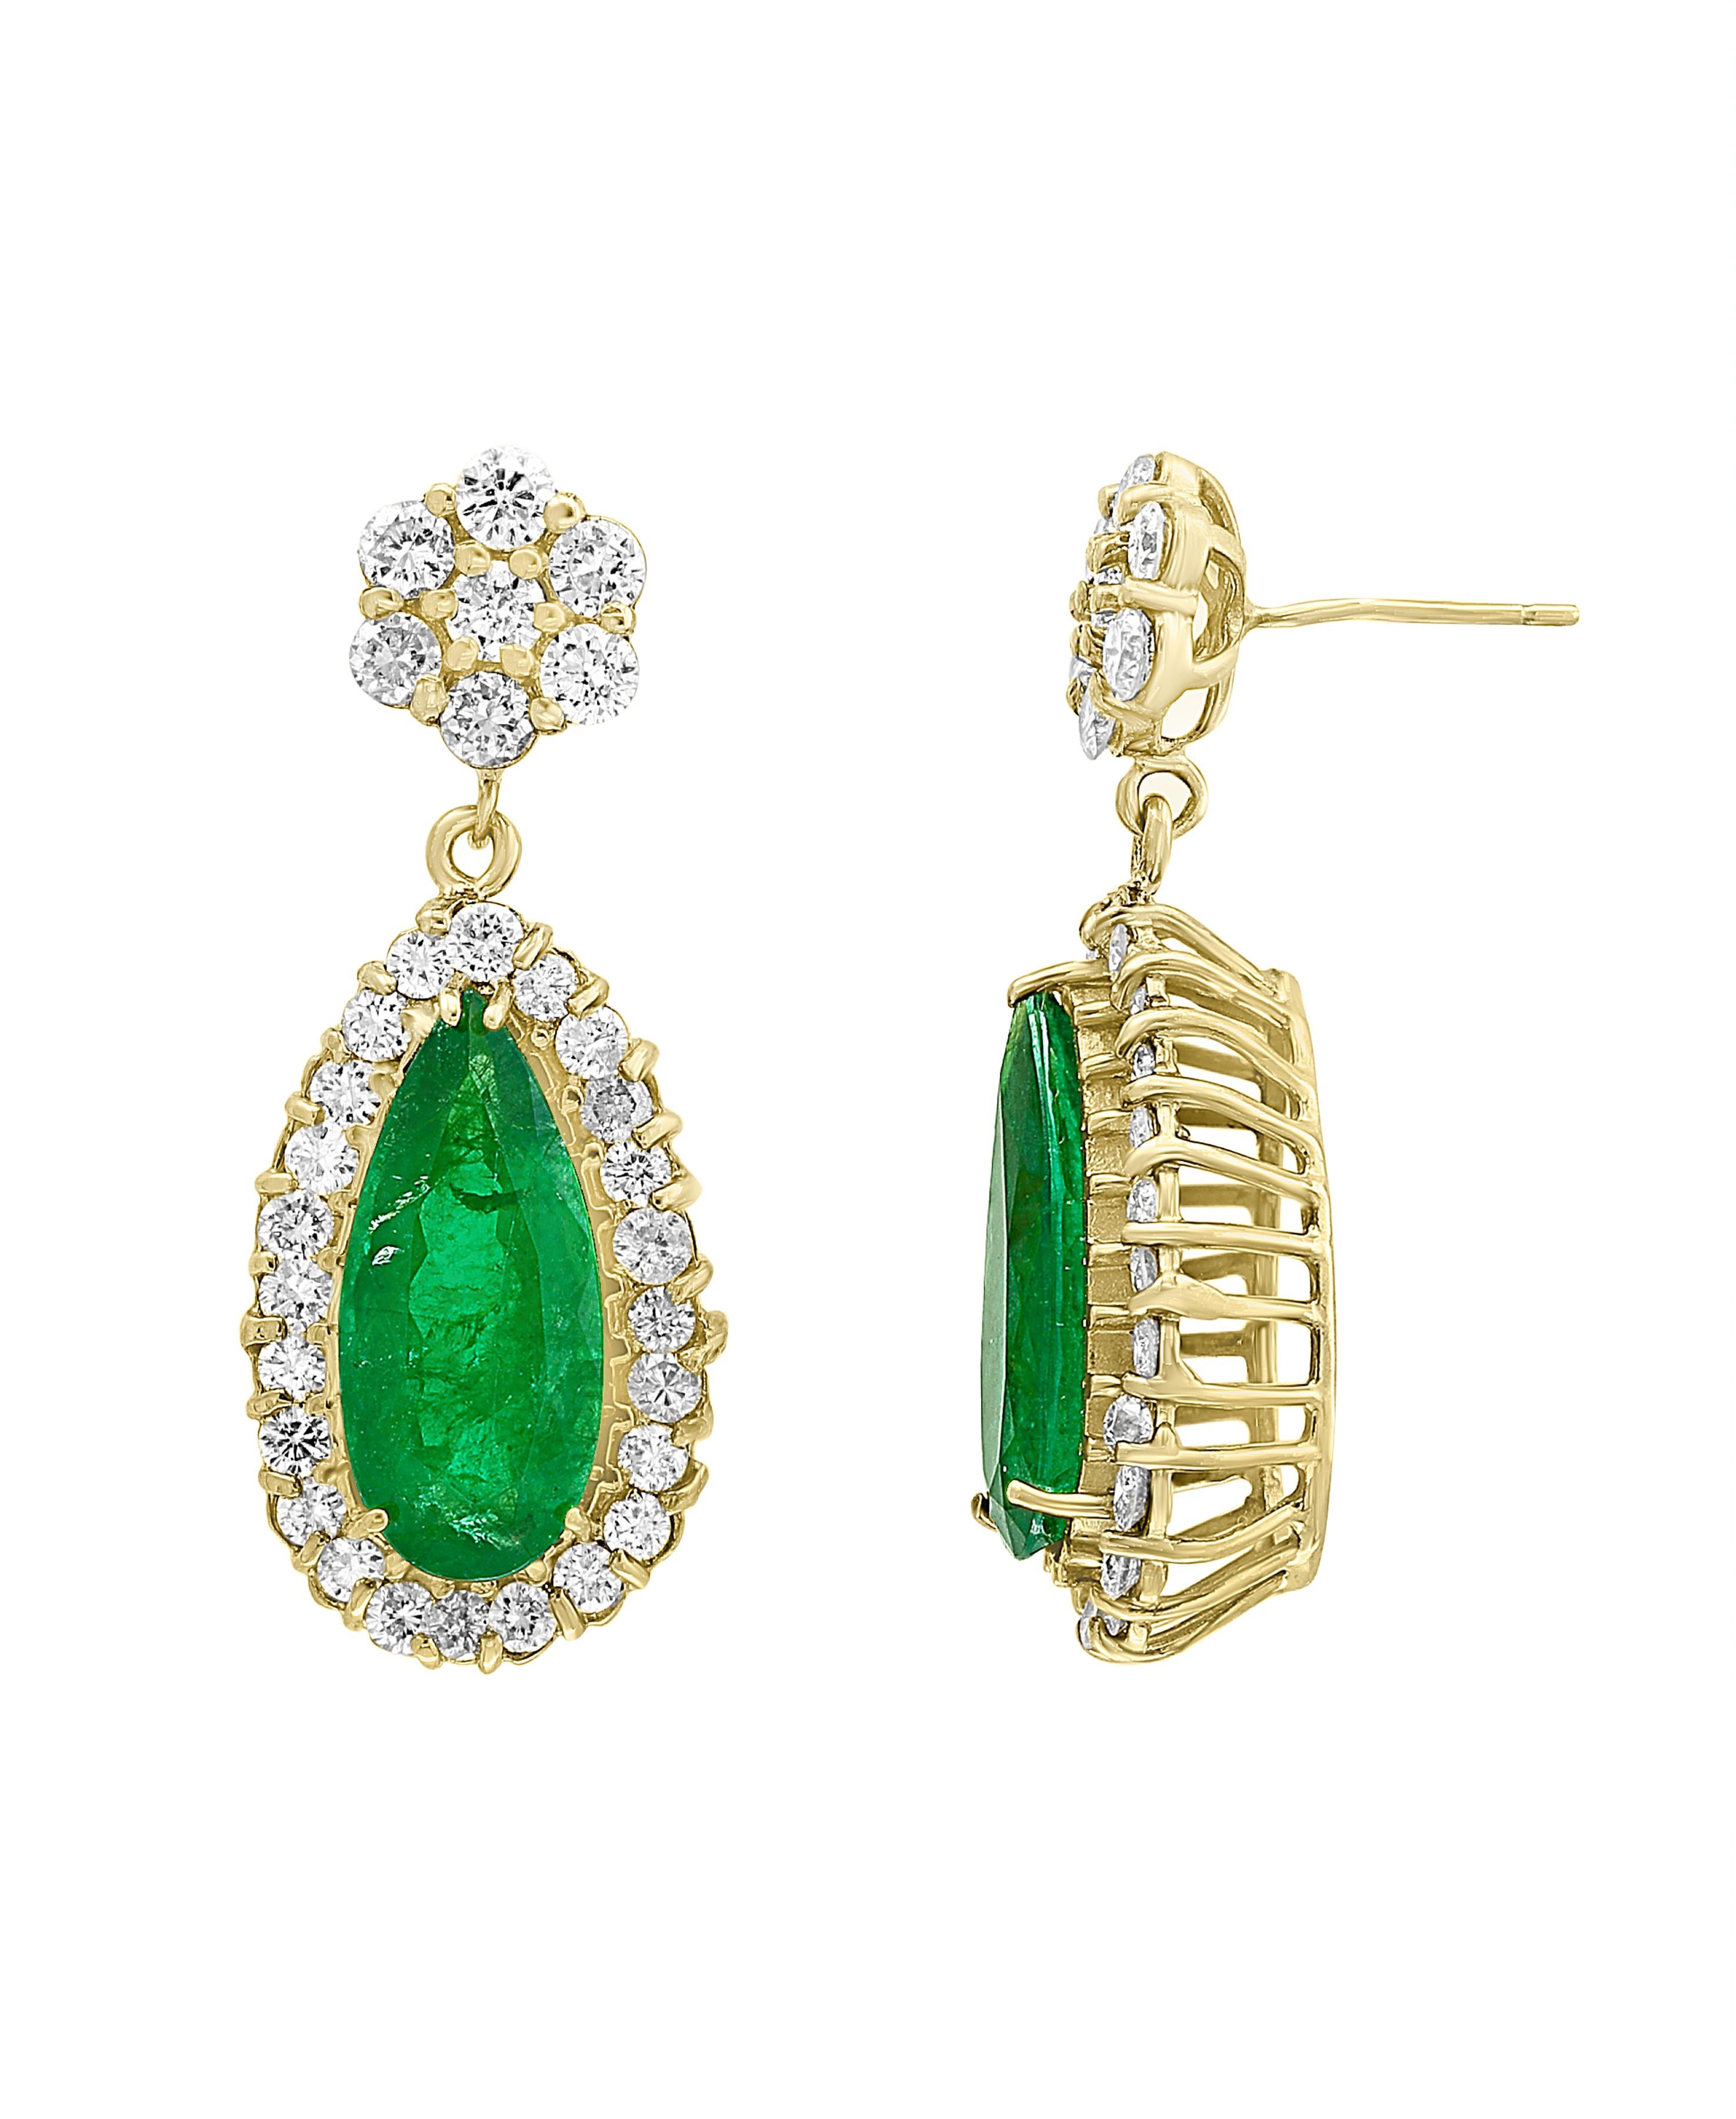 
11 Carat Colombian Pear Shape Emerald Diamond  Hanging Earrings 14 K Yellow Gold
This exquisite pair of earrings are beautifully crafted with 14 karat Yellow gold  weighing    
 14 grams
Two fine Natural  Colombian Pear Shape Emeralds weighing